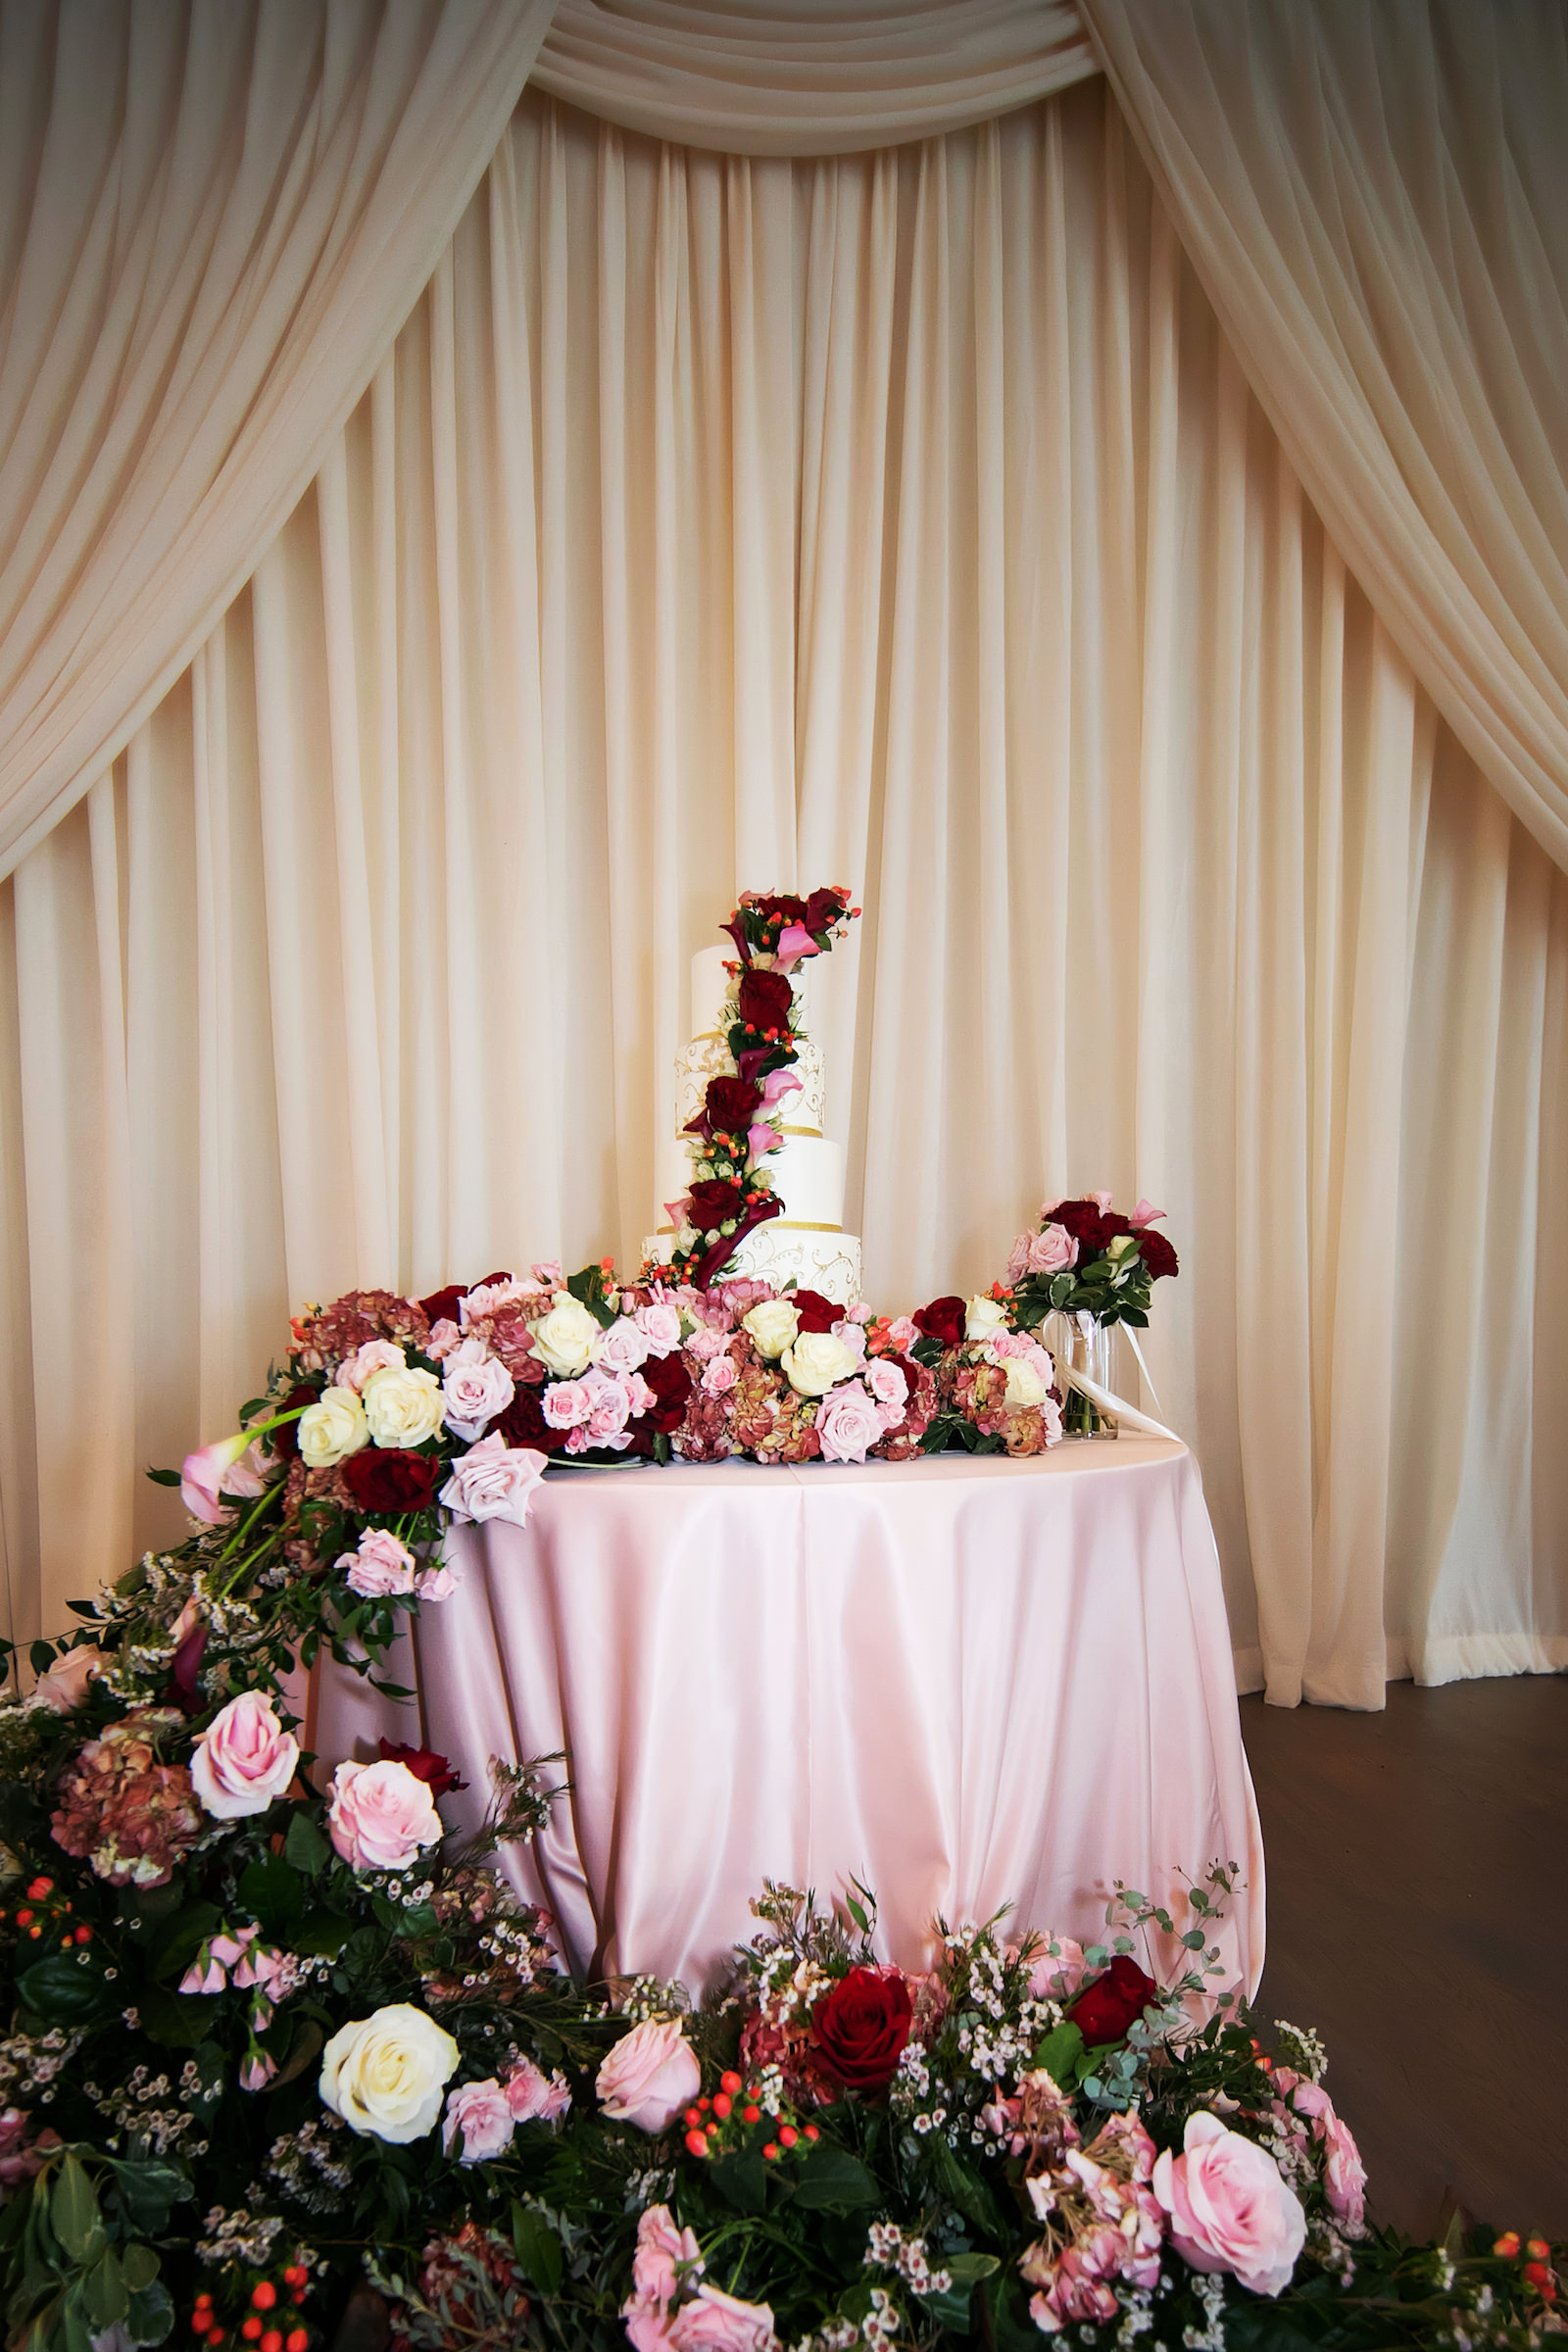 Lush Burgundy, Pink and White Roses and Greenery Floral Cascading Cake Table with 4-Tier White and Gold Wedding Cake for Garden Inspired Ballroom Wedding | Tampa Bay Photographer Limelight Photography | Florist Lemon Drops | Planner Breezin Weddings